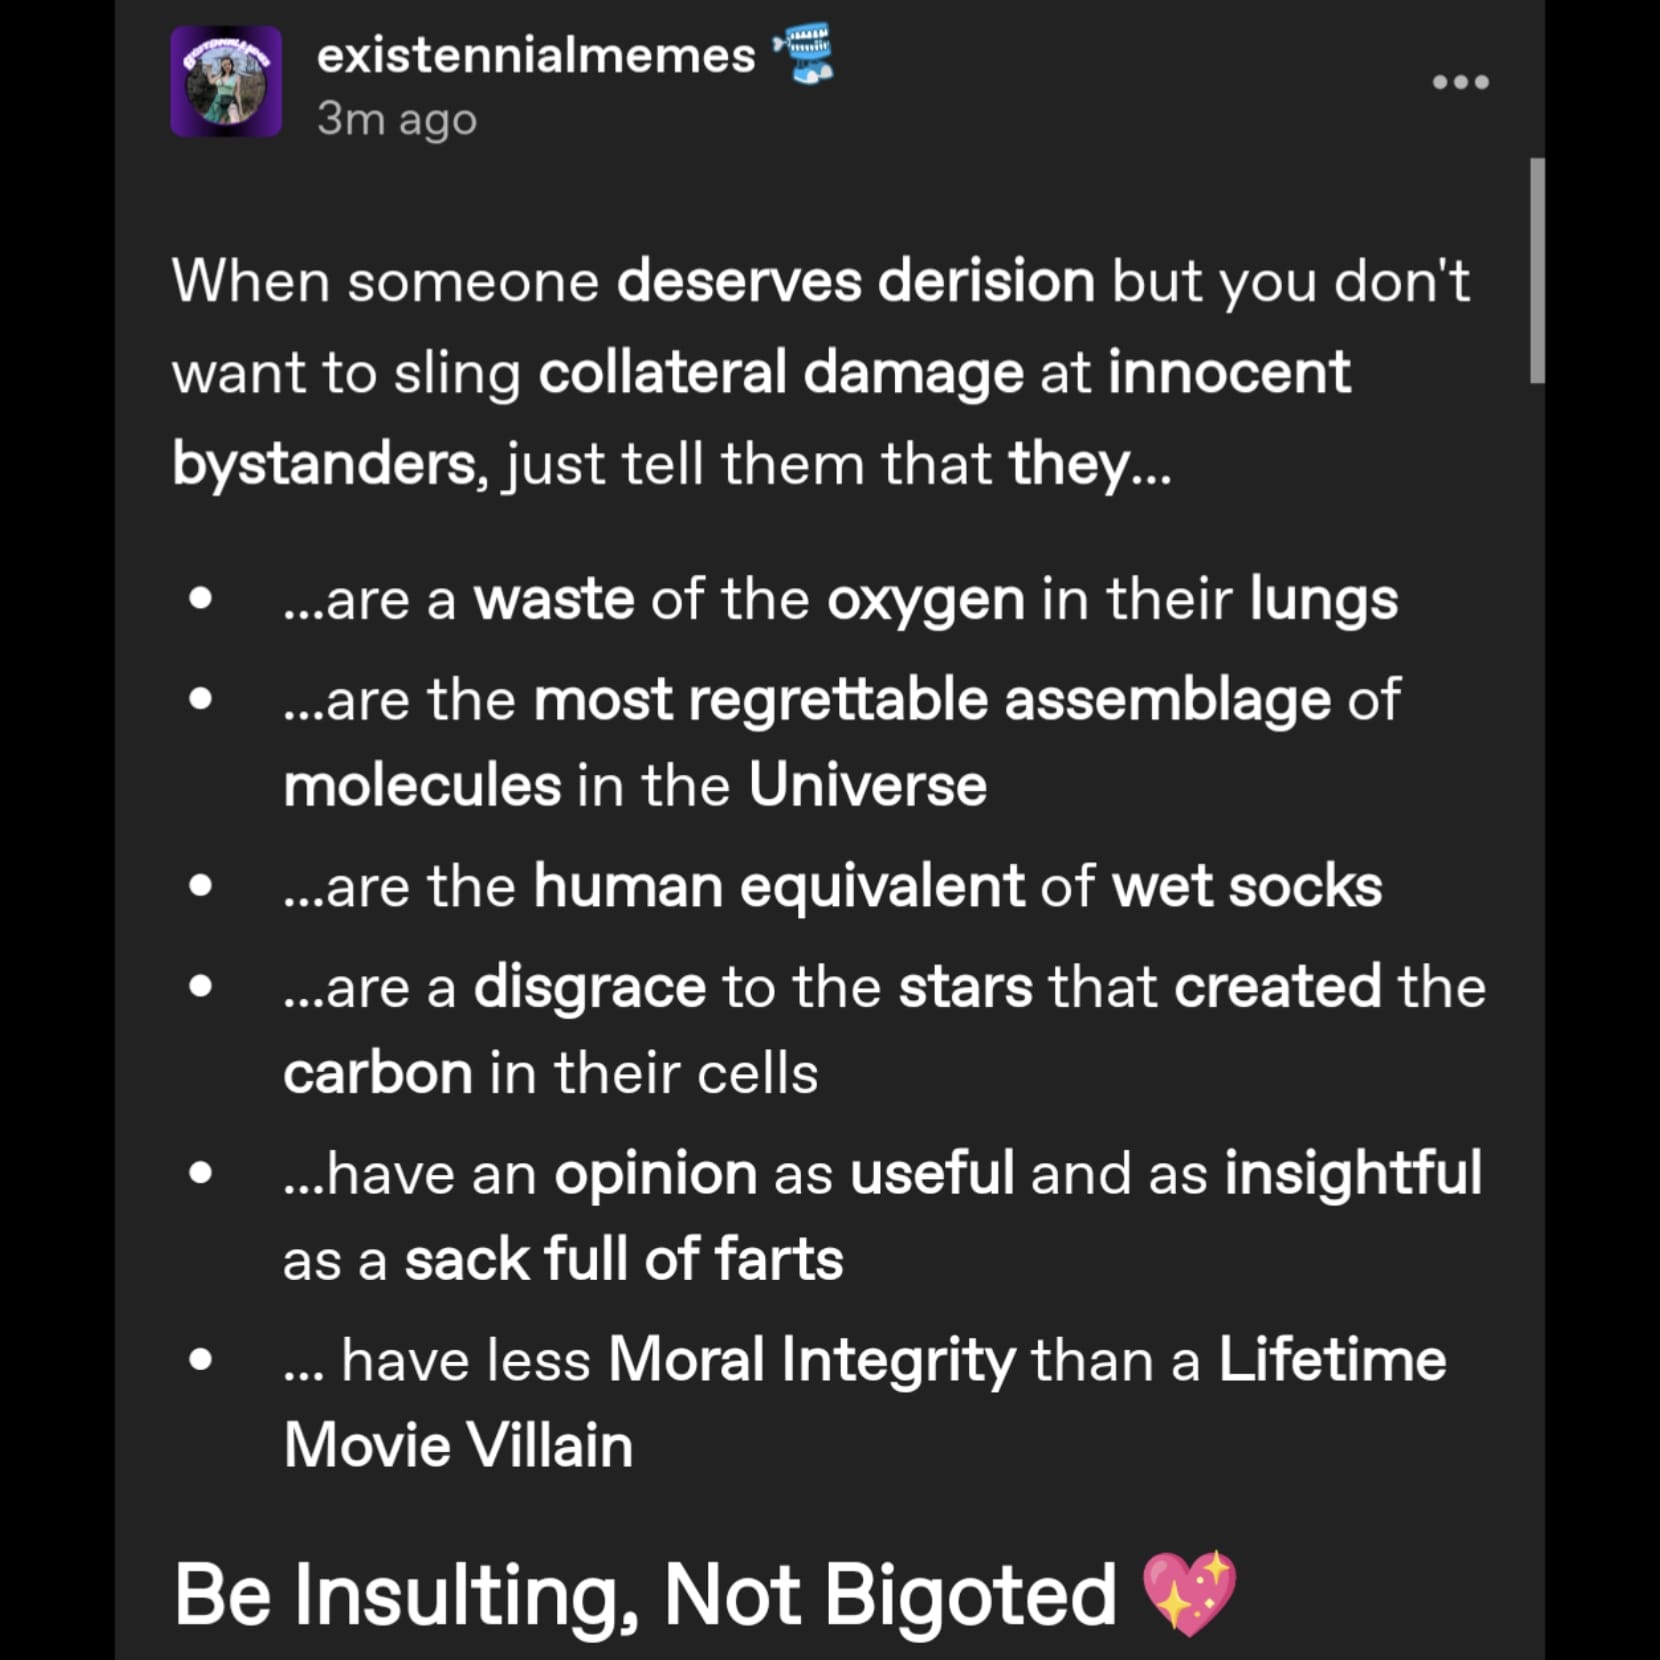 a tumblr post by user existennialmemes that reads When someone deserves derision but you don't want to sling collateral damage at innocent bystanders, just tell them that they...
 ...are a waste of the oxygen in their lungs
...are the most regrettable assemblage of molecules in the Universe
...are the human equivalent of wet socks
...are a disgrace to the stars that created the carbon in their cells
...have an opinion as useful and as insightful as a sack full of farts
... have less Moral Integrity than a Lifetime Movie Villain
Be Insulting, Not Bigoted 💖